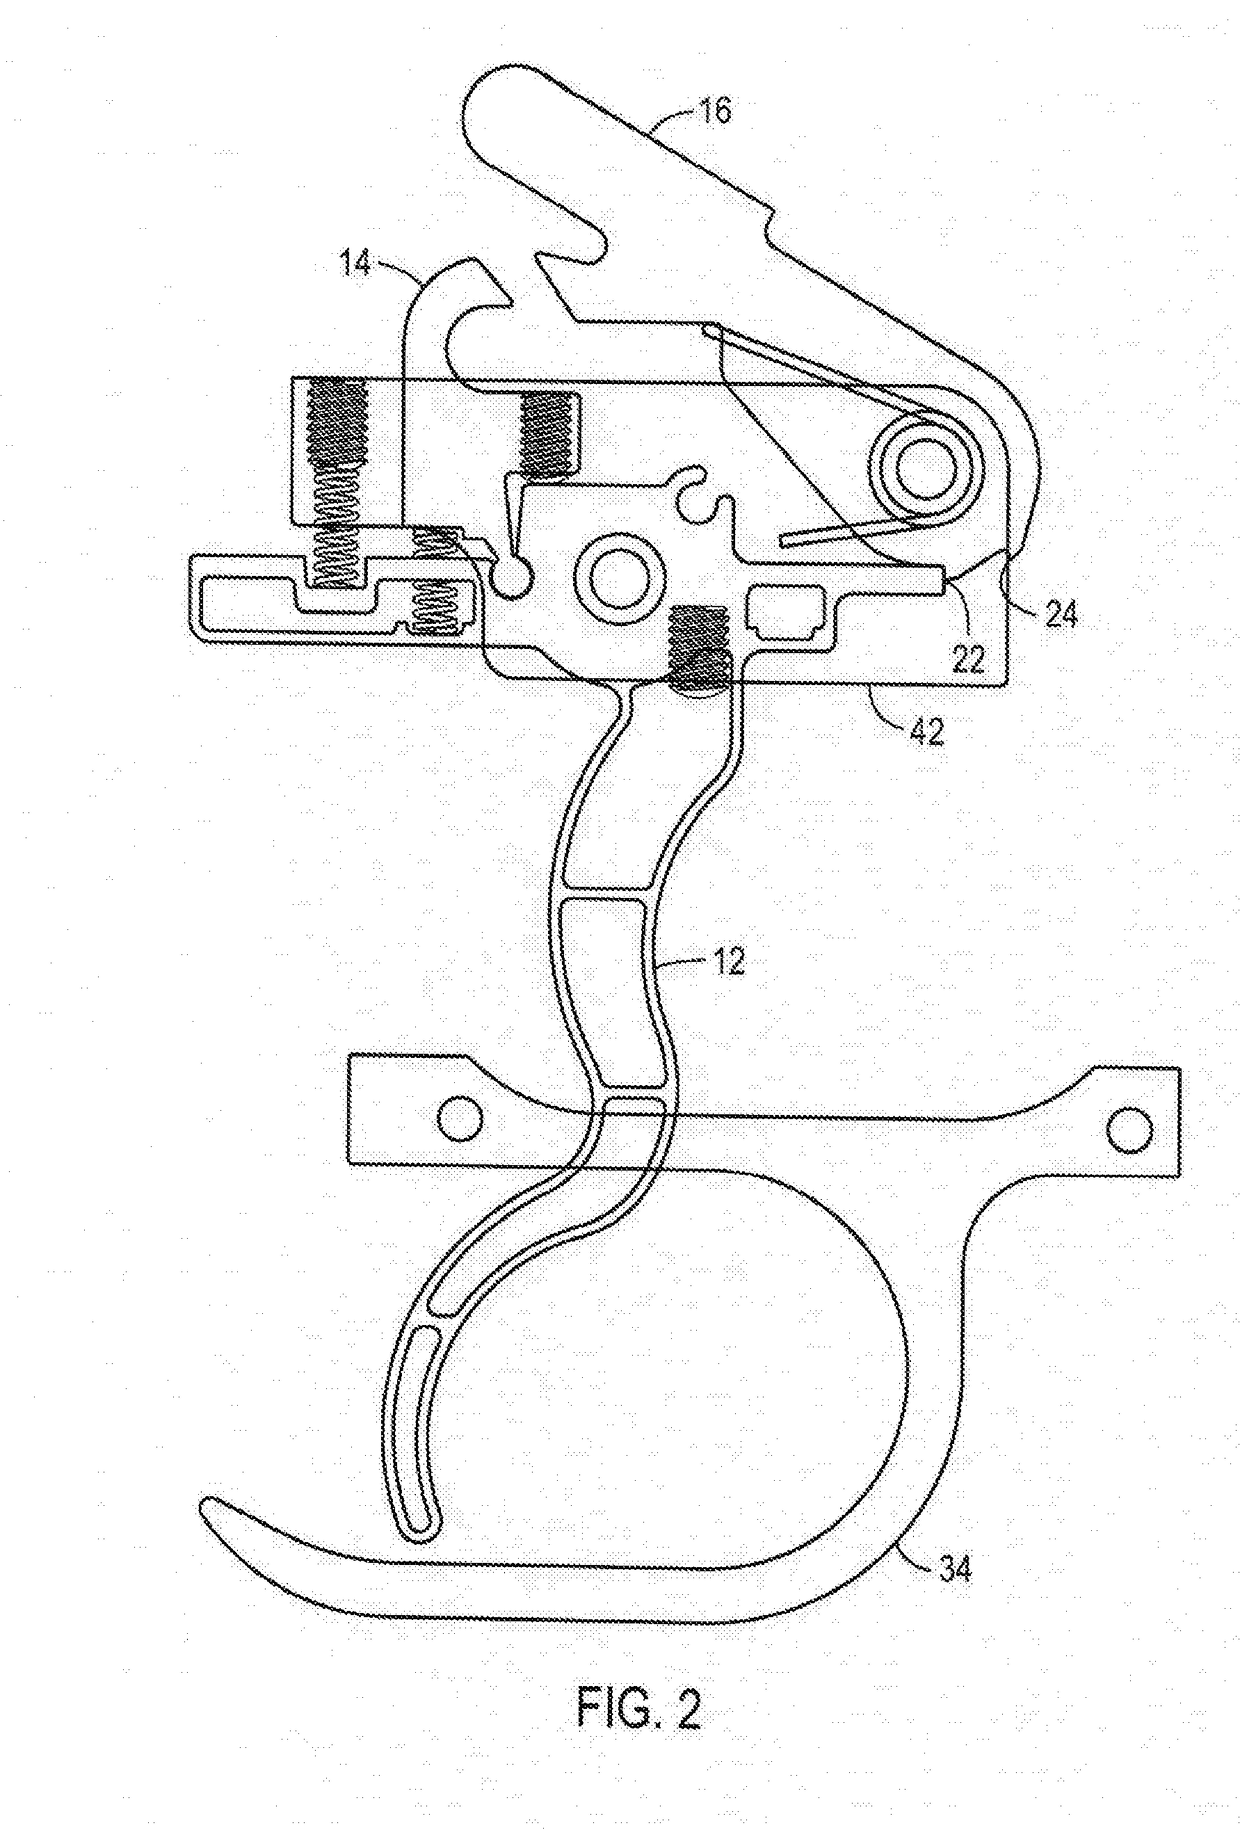 Trigger Assembly with Modifications